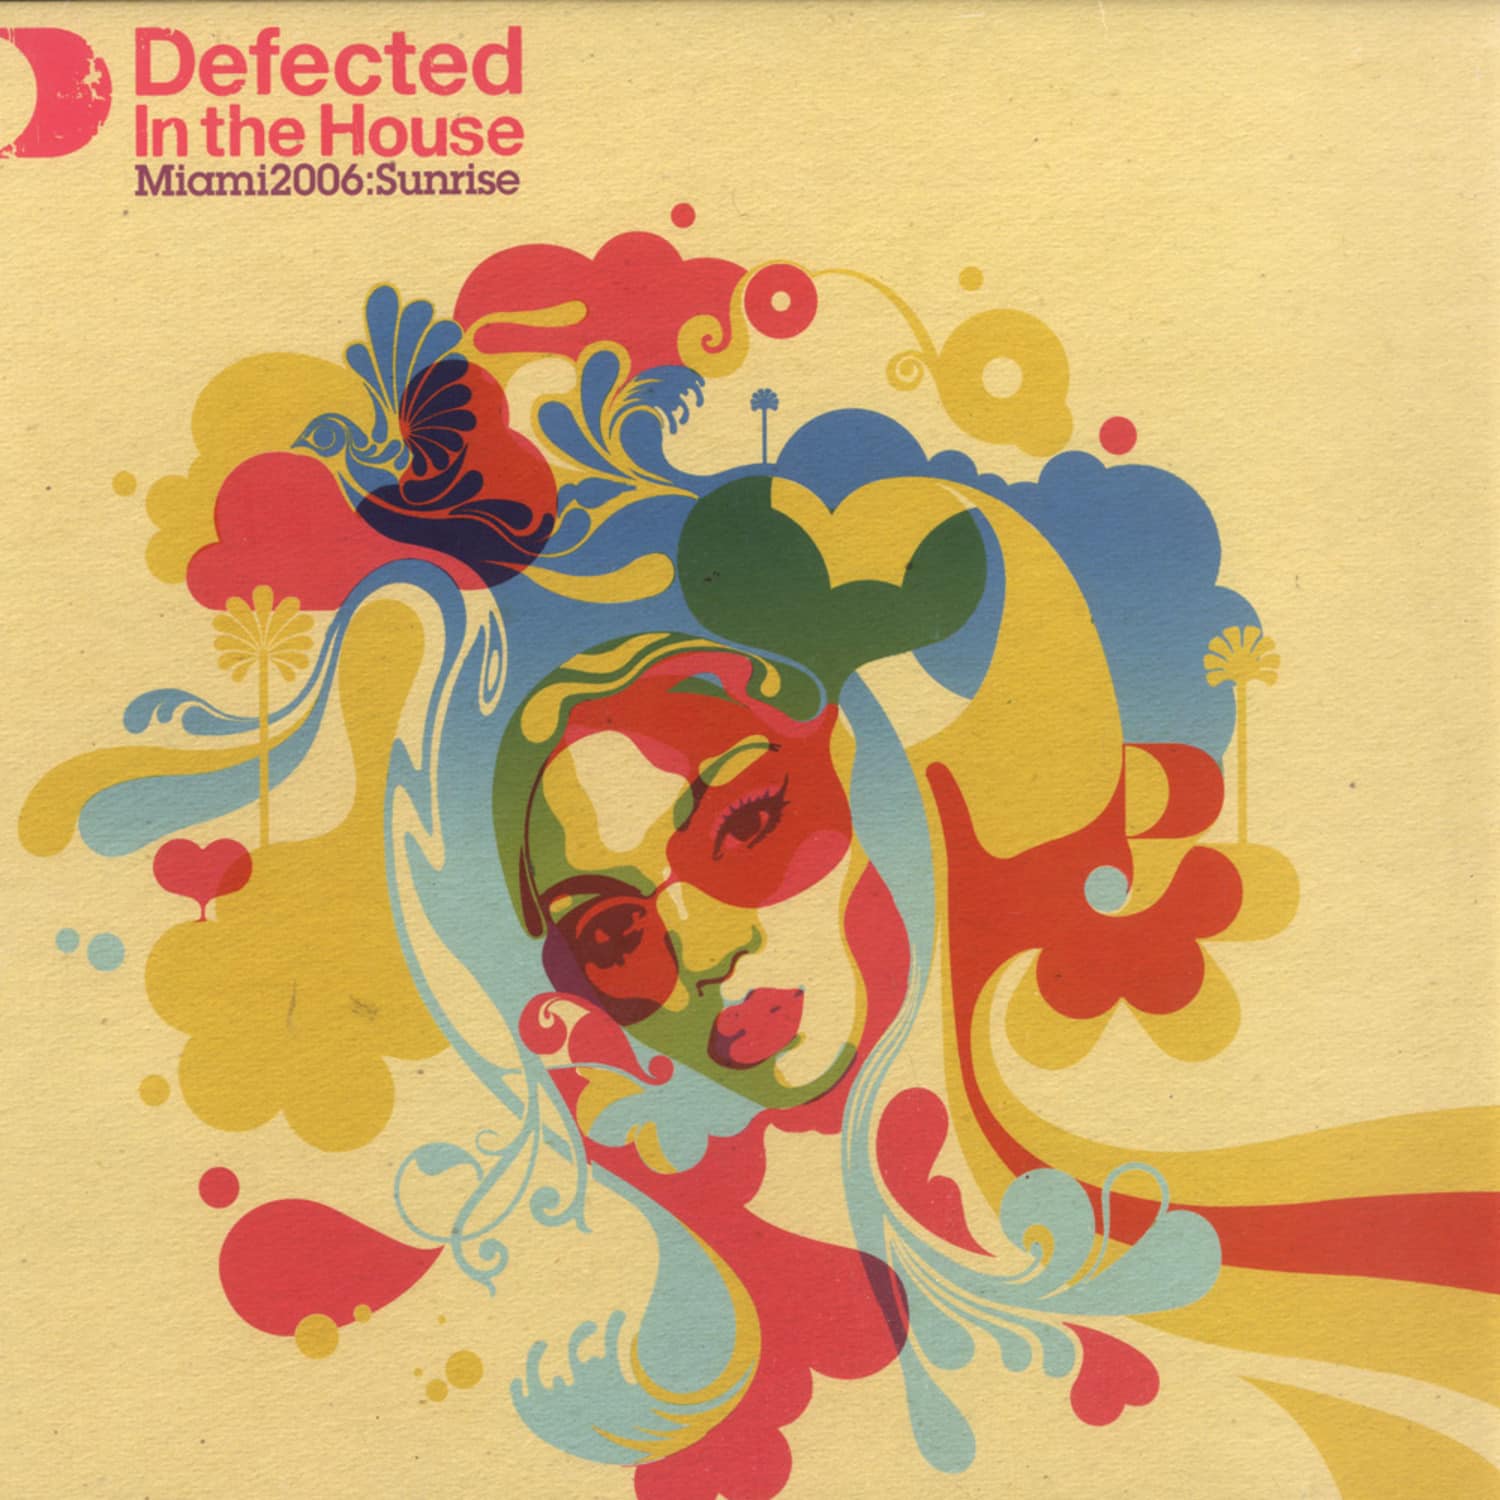 V/A Defected in the House - MIAMI 2006 SUNRISE 